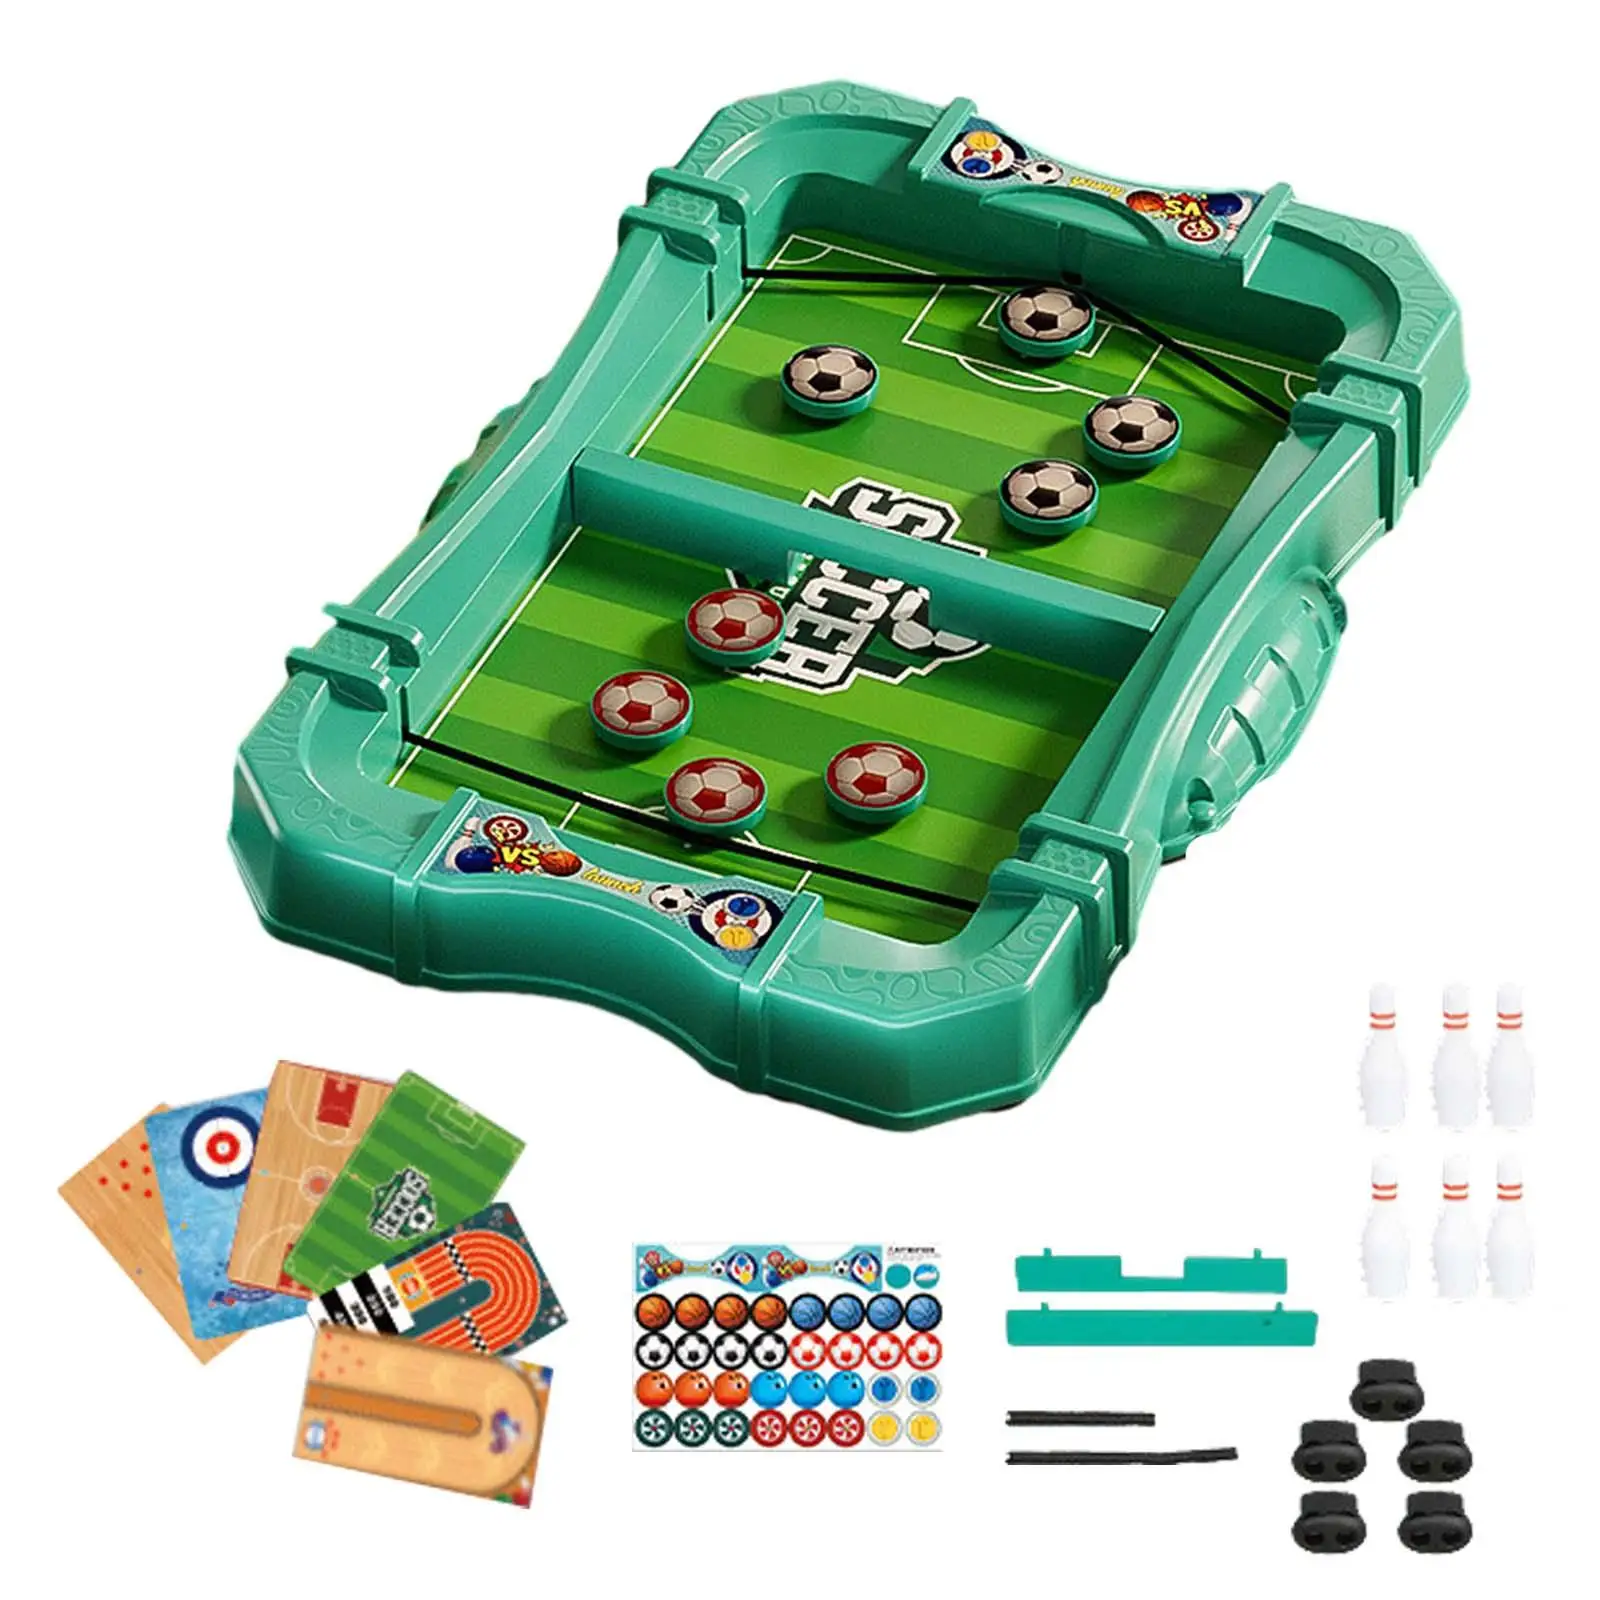 Fast Game 6 in 1 Design Board Game Desktop Battle Game Winner Sports Tabletop Game for Airplane Toy Party Favor